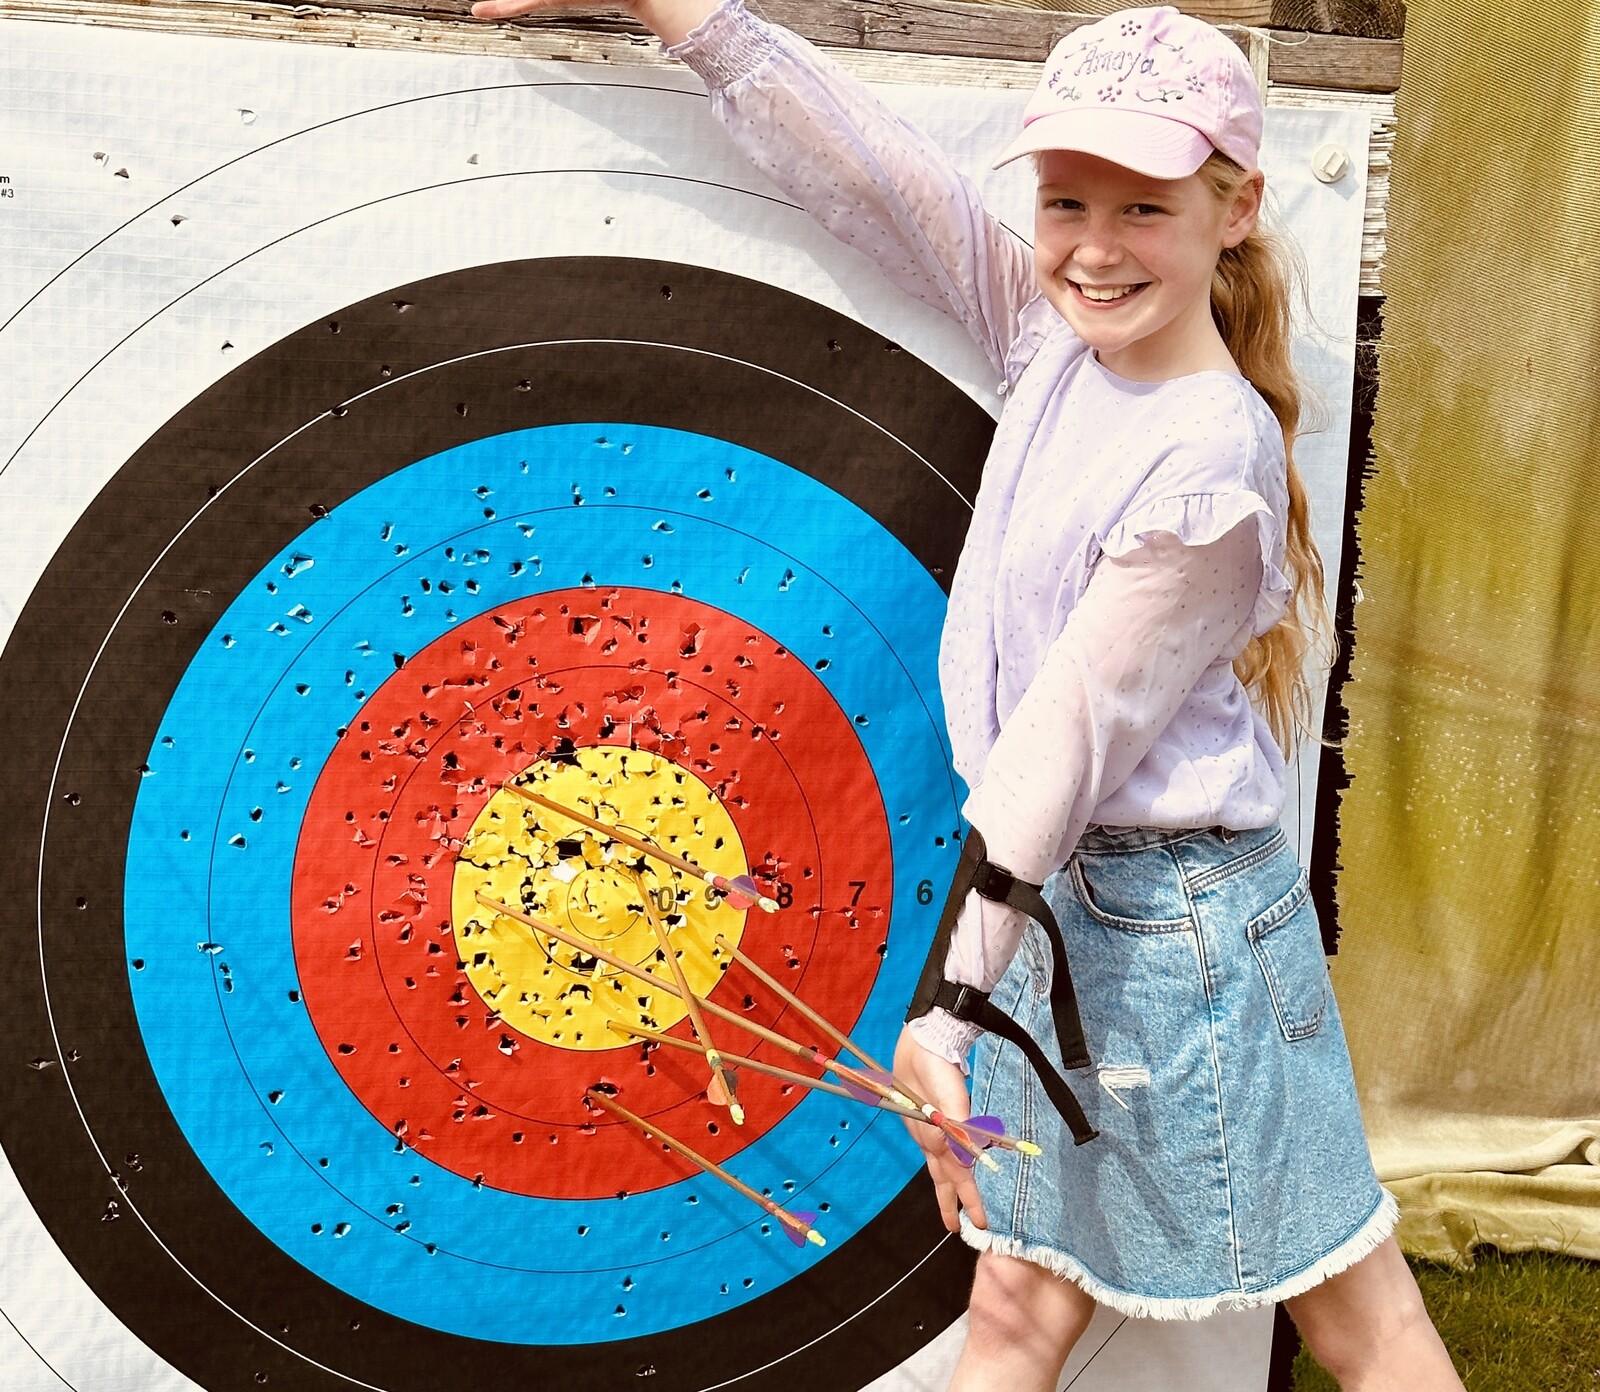 Girl standing by a target